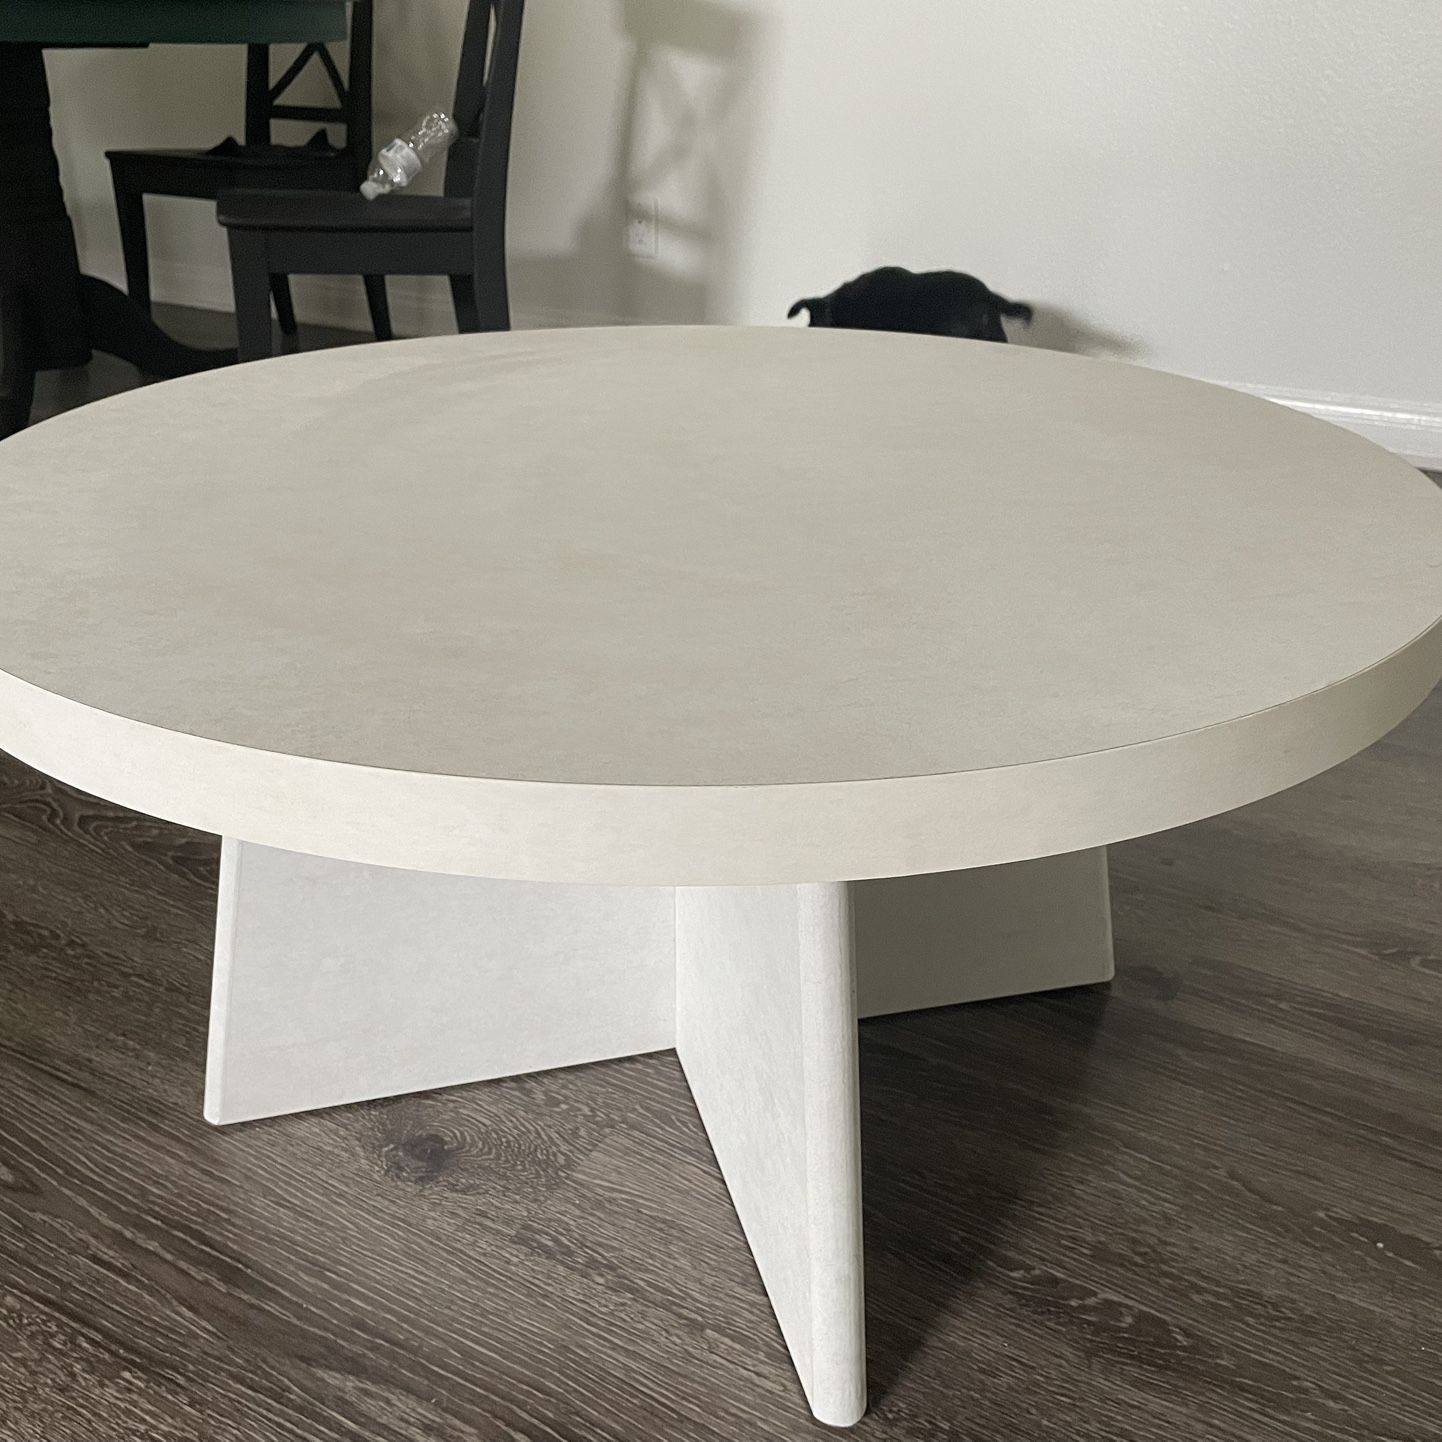 Queer Eye Liam Round Coffee Table For Sale In Huntington Beach, Ca – Offerup Intended For Liam Round Plaster Coffee Tables (Photo 8 of 15)